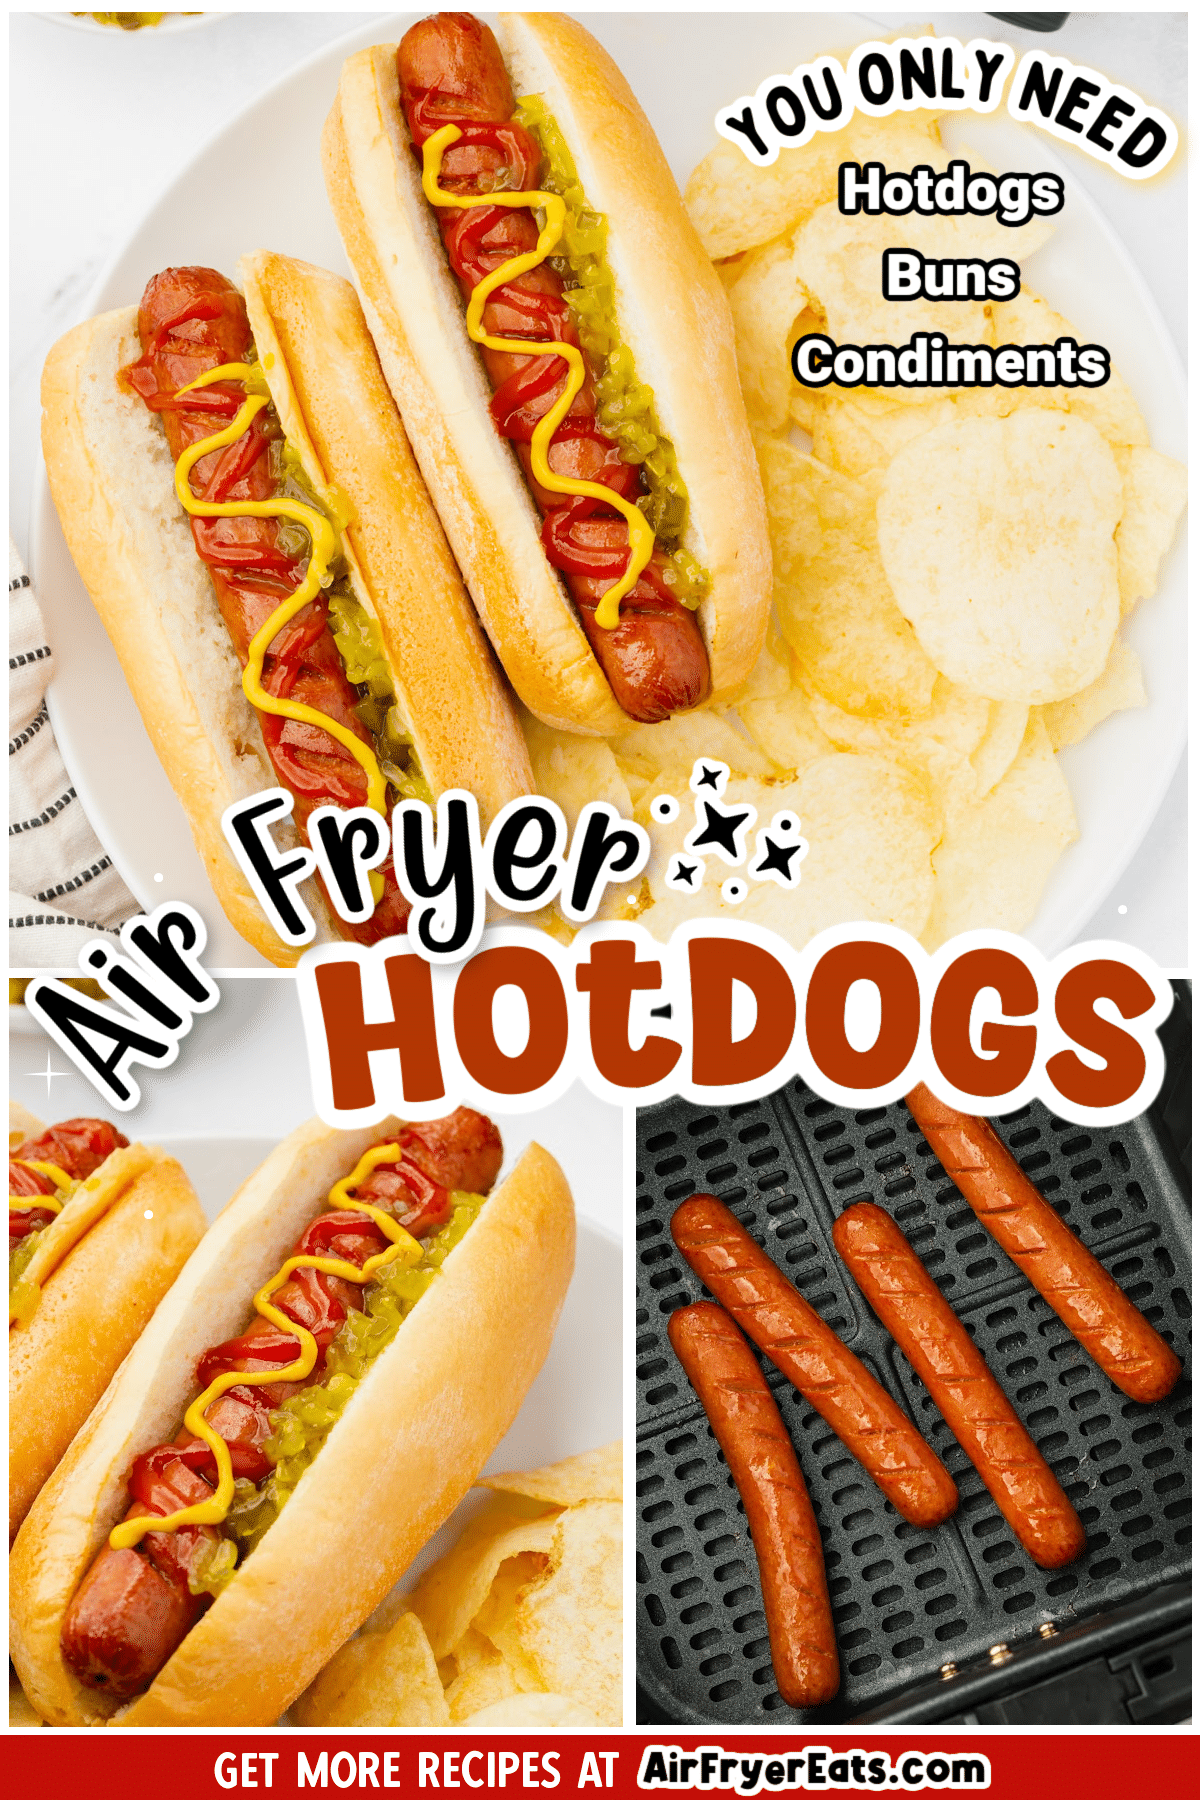 When you want to make a great-tasting hotdog in the comfort of your home, the air fryer is the way to go! Air Fryer Hotdogs get that fresh-from-the-ballpark taste in only 5 minutes! #hotdogs #airfryerhotdogs #frankfurters via @vegetarianmamma